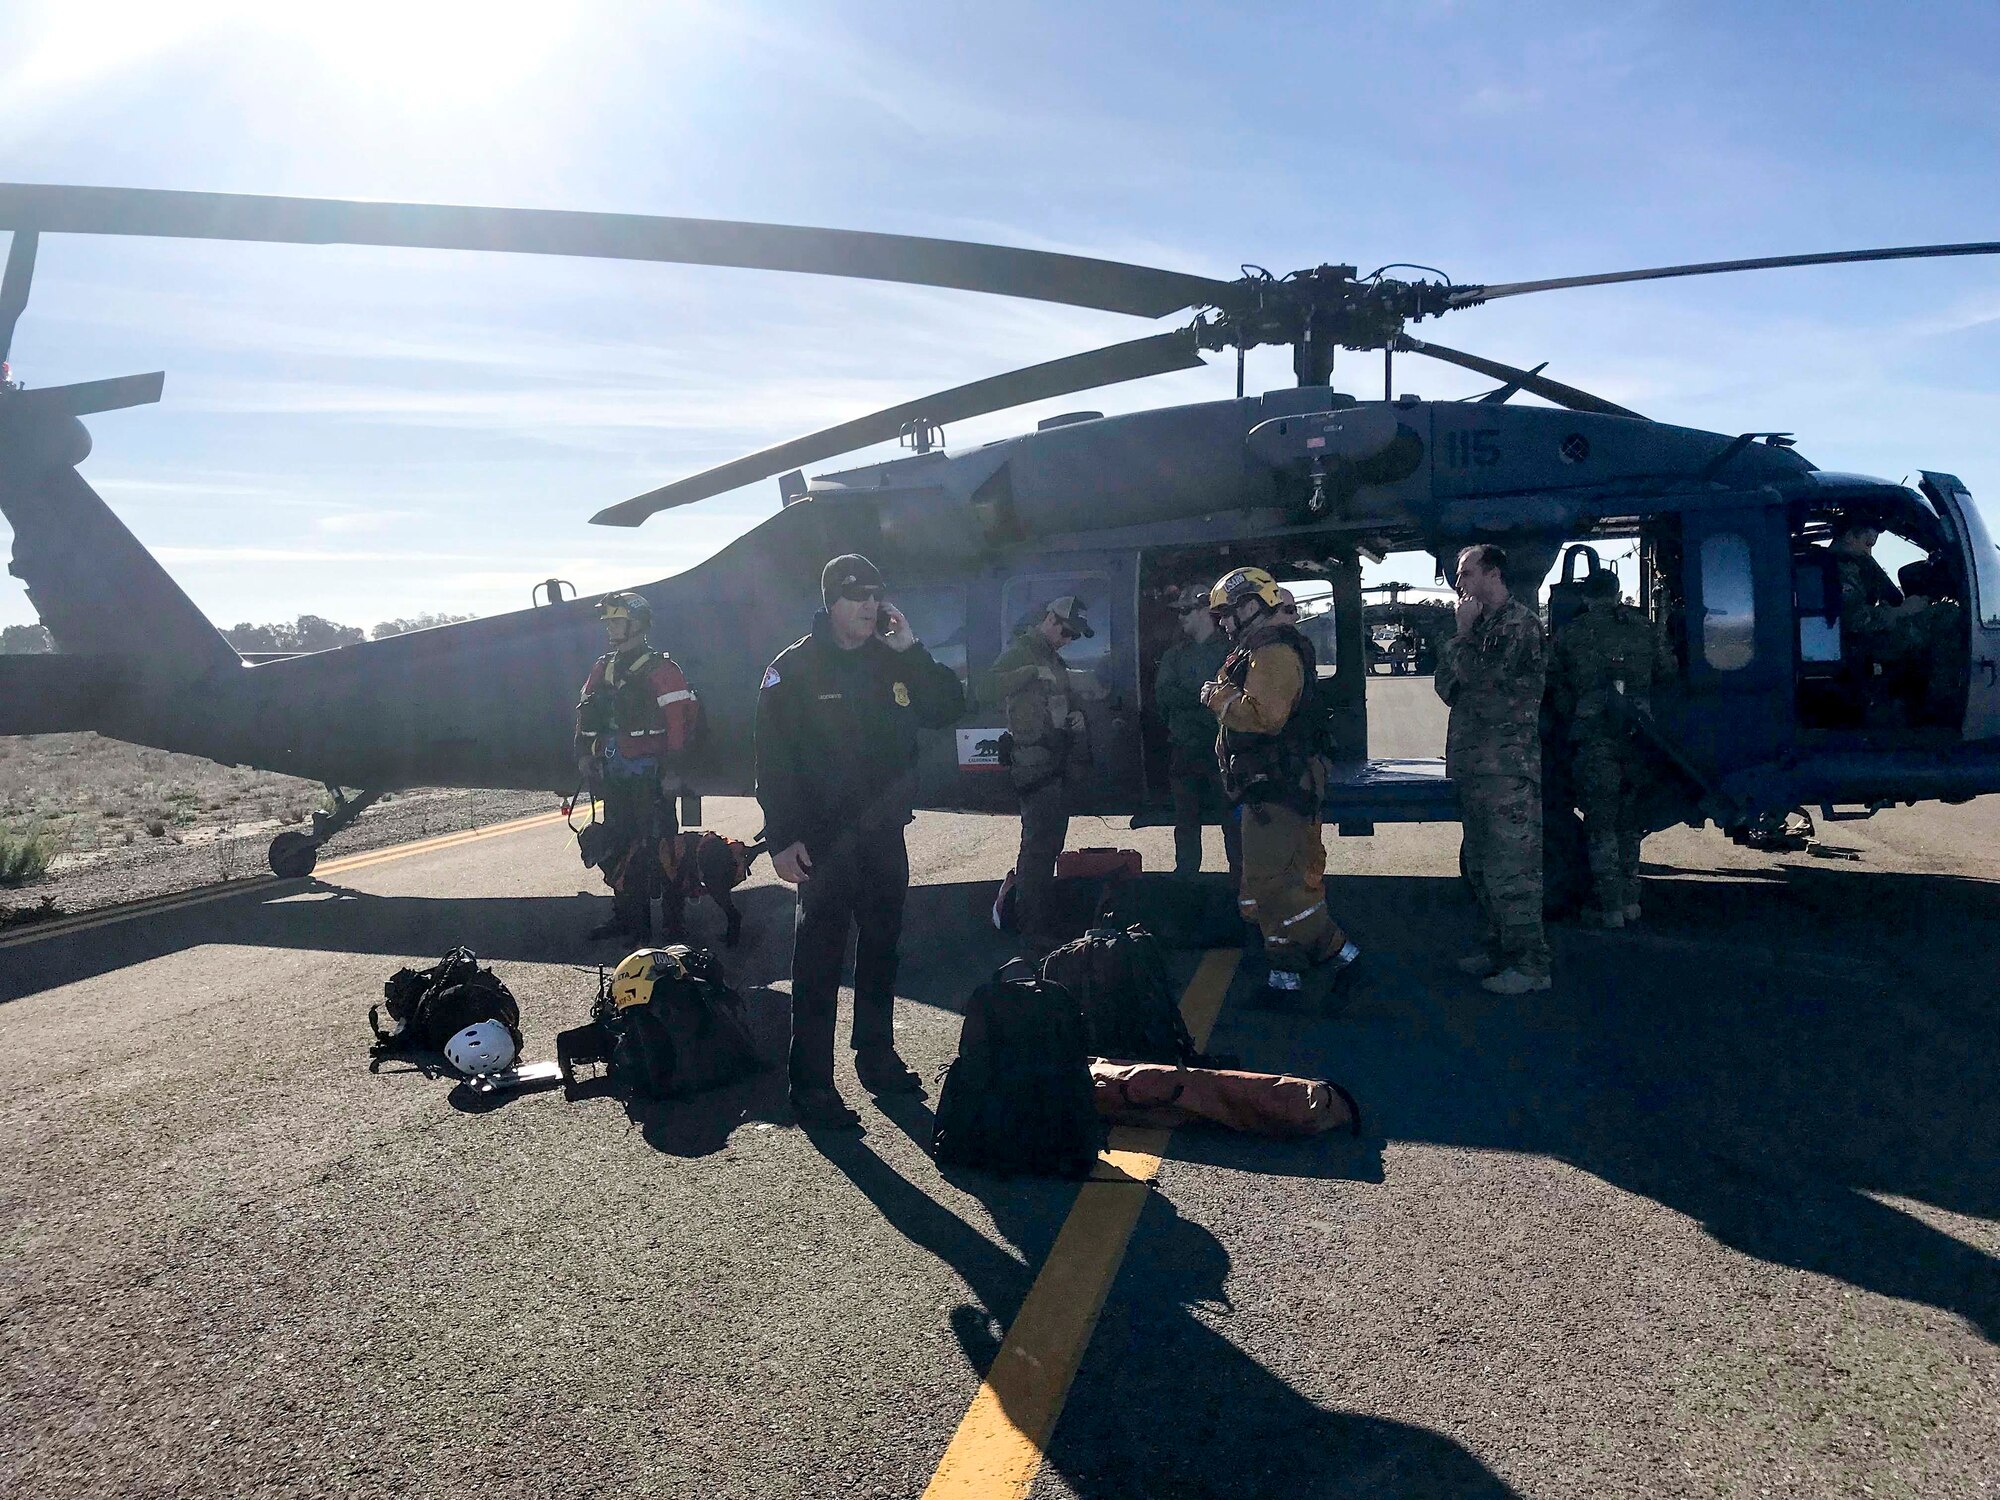 A California Air National Guard HH-60G Pave Hawk rescue helicopter with air crews and  two elite Guardian Angel pararescuemen from the 129th Rescue Wing Moffett Air National Guard Base, Calif, provide search and rescue operations in Southern California, impacted by a mud slides, Jan. 10, 2018. (photo by Staff Sgt. Cristian Meyers/released)